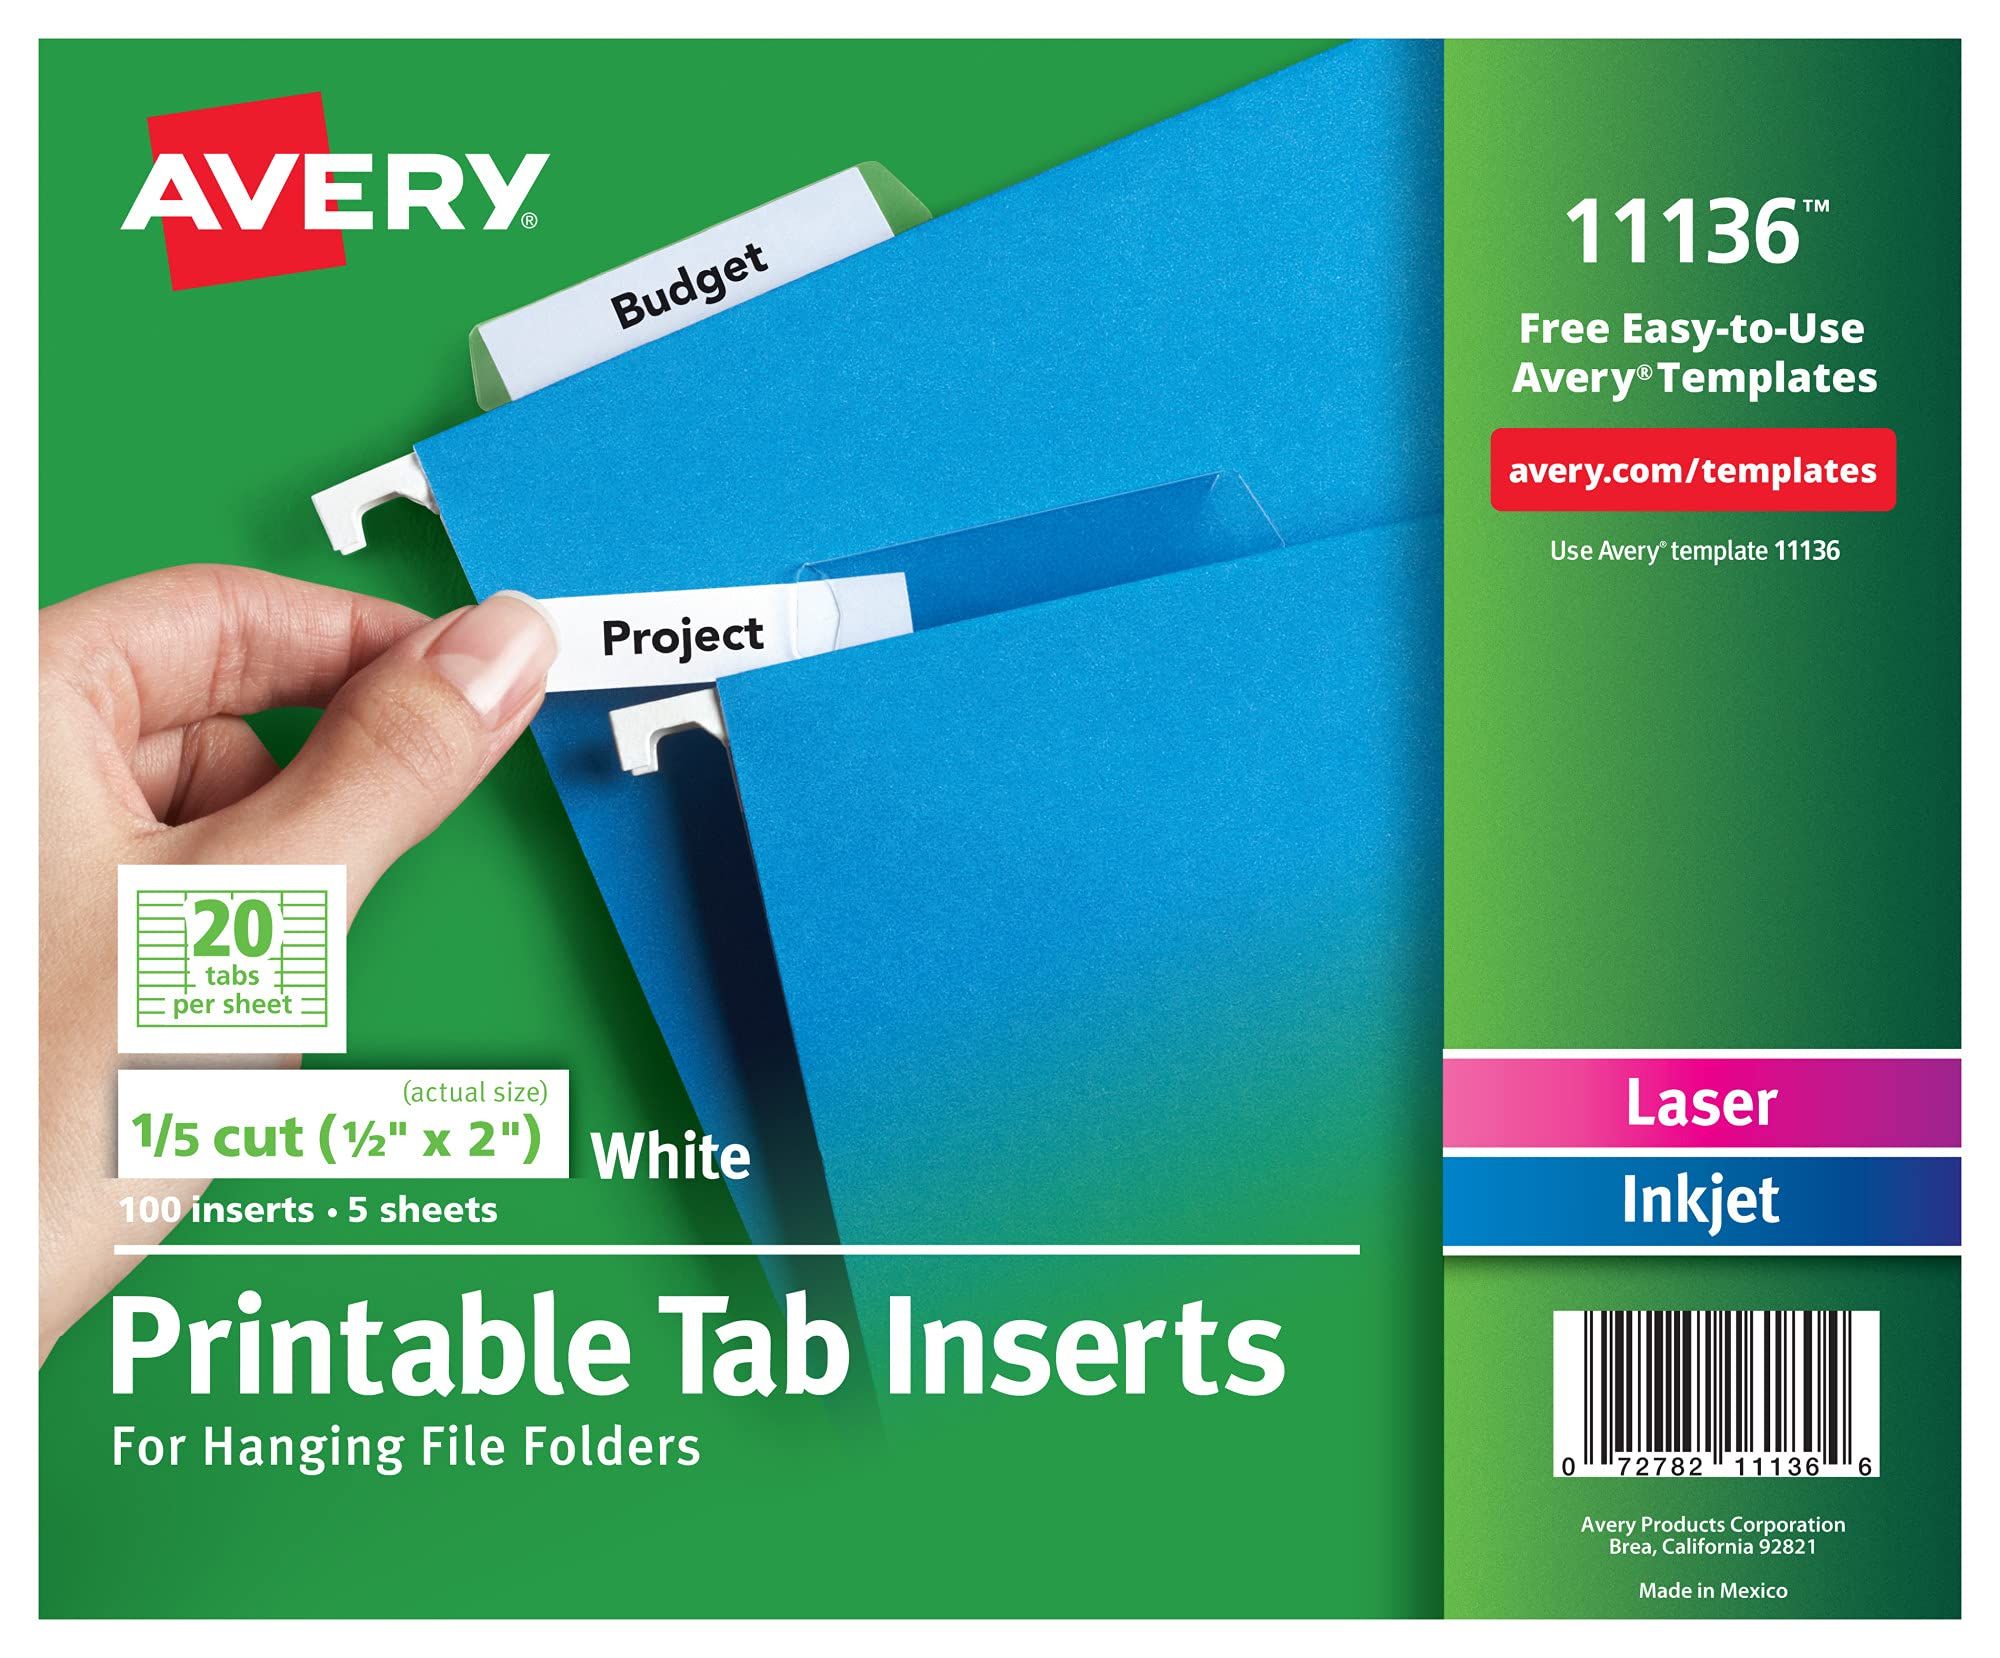 Avery WorkSaver Tab Inserts, 2 Inches, White, 100 Inserts (11136) | Amazon (US)